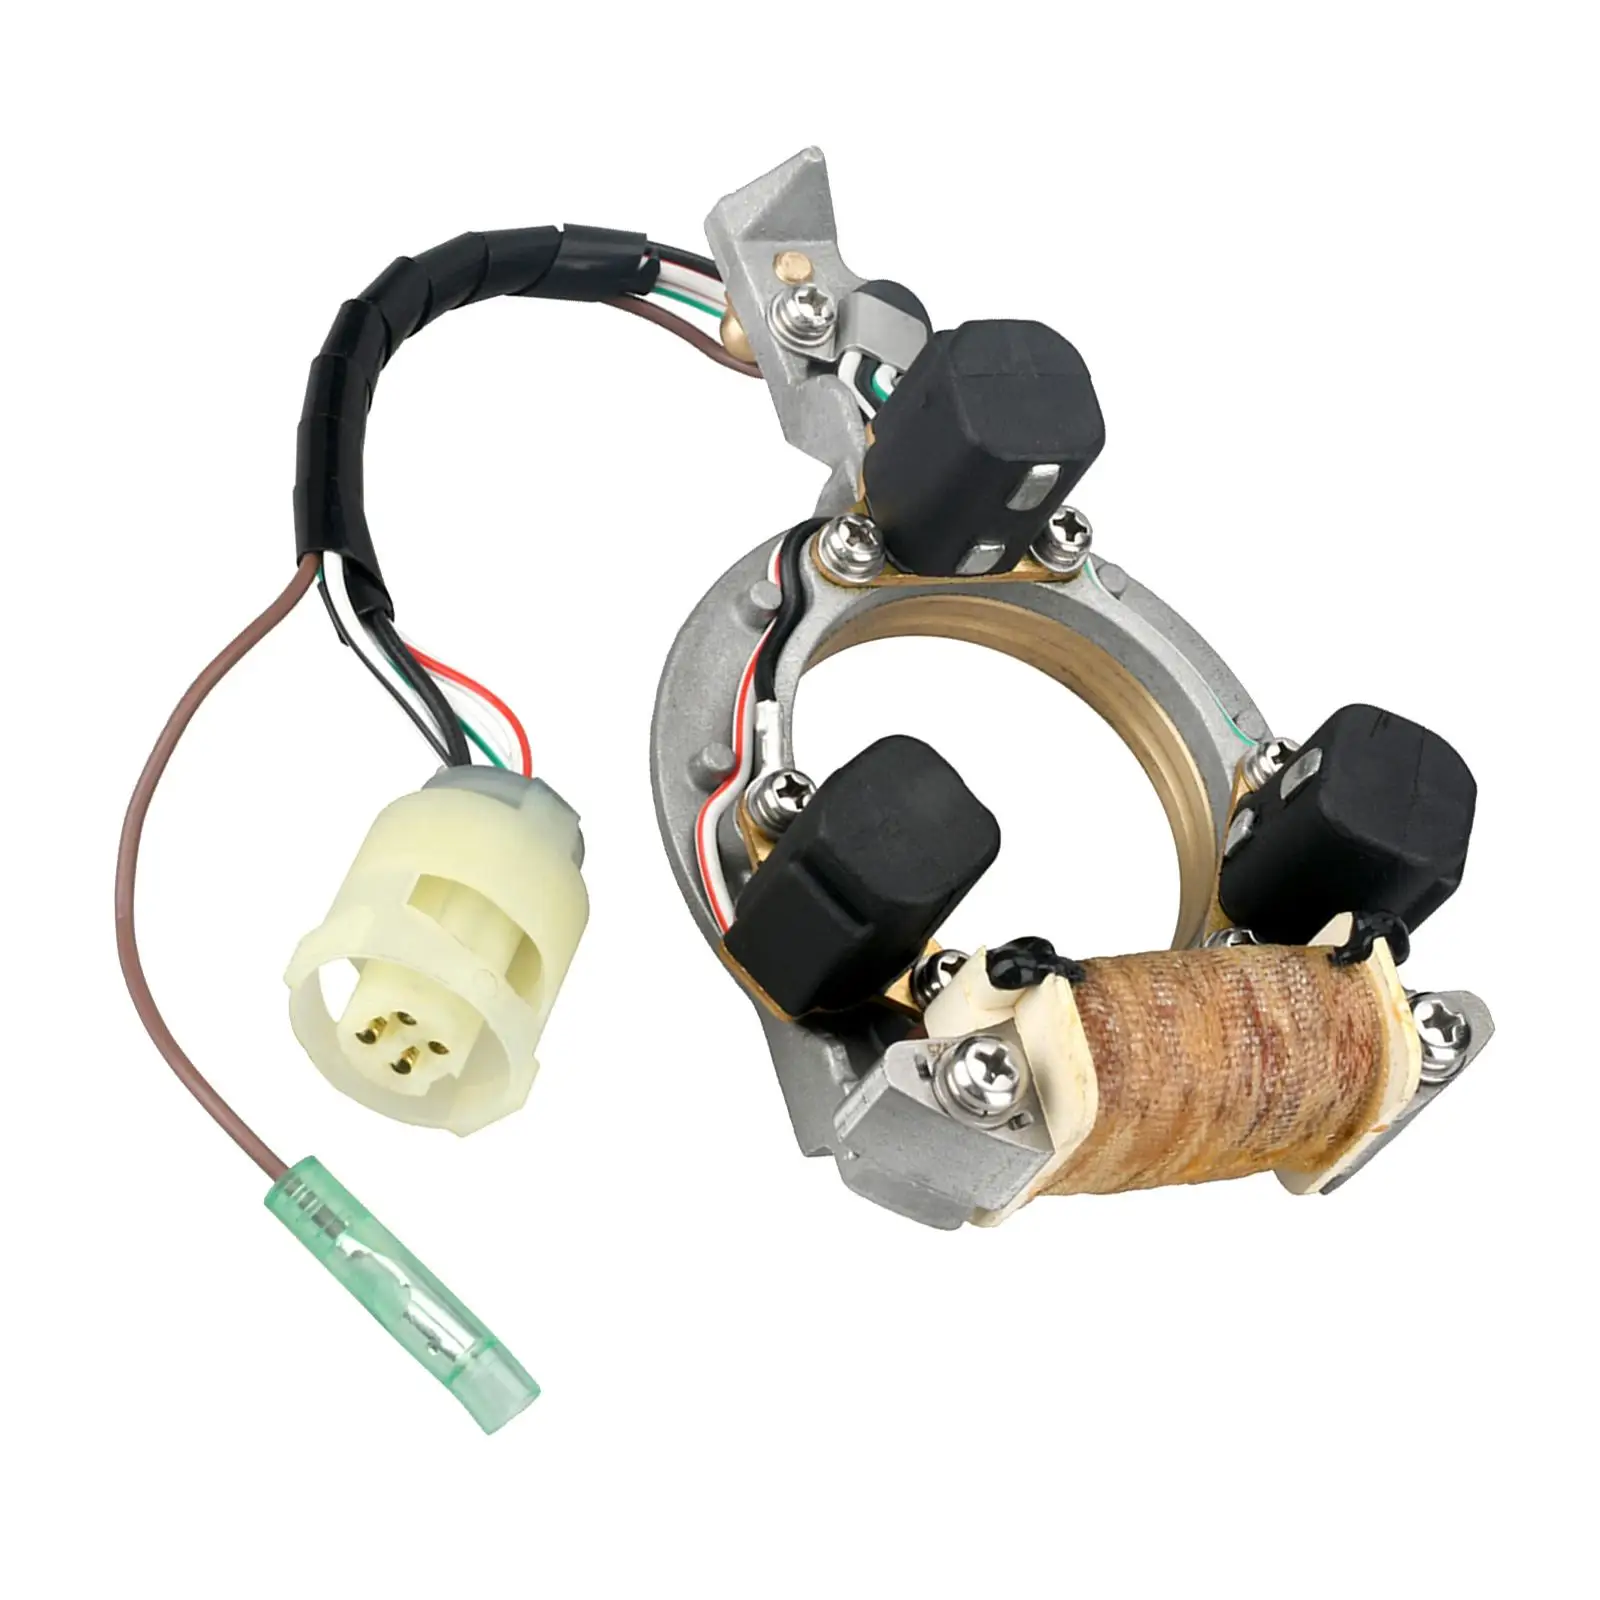 Boat Motor Stator Assy for Yamaha Outboard Engine 60HP Easily Install Stable Performance